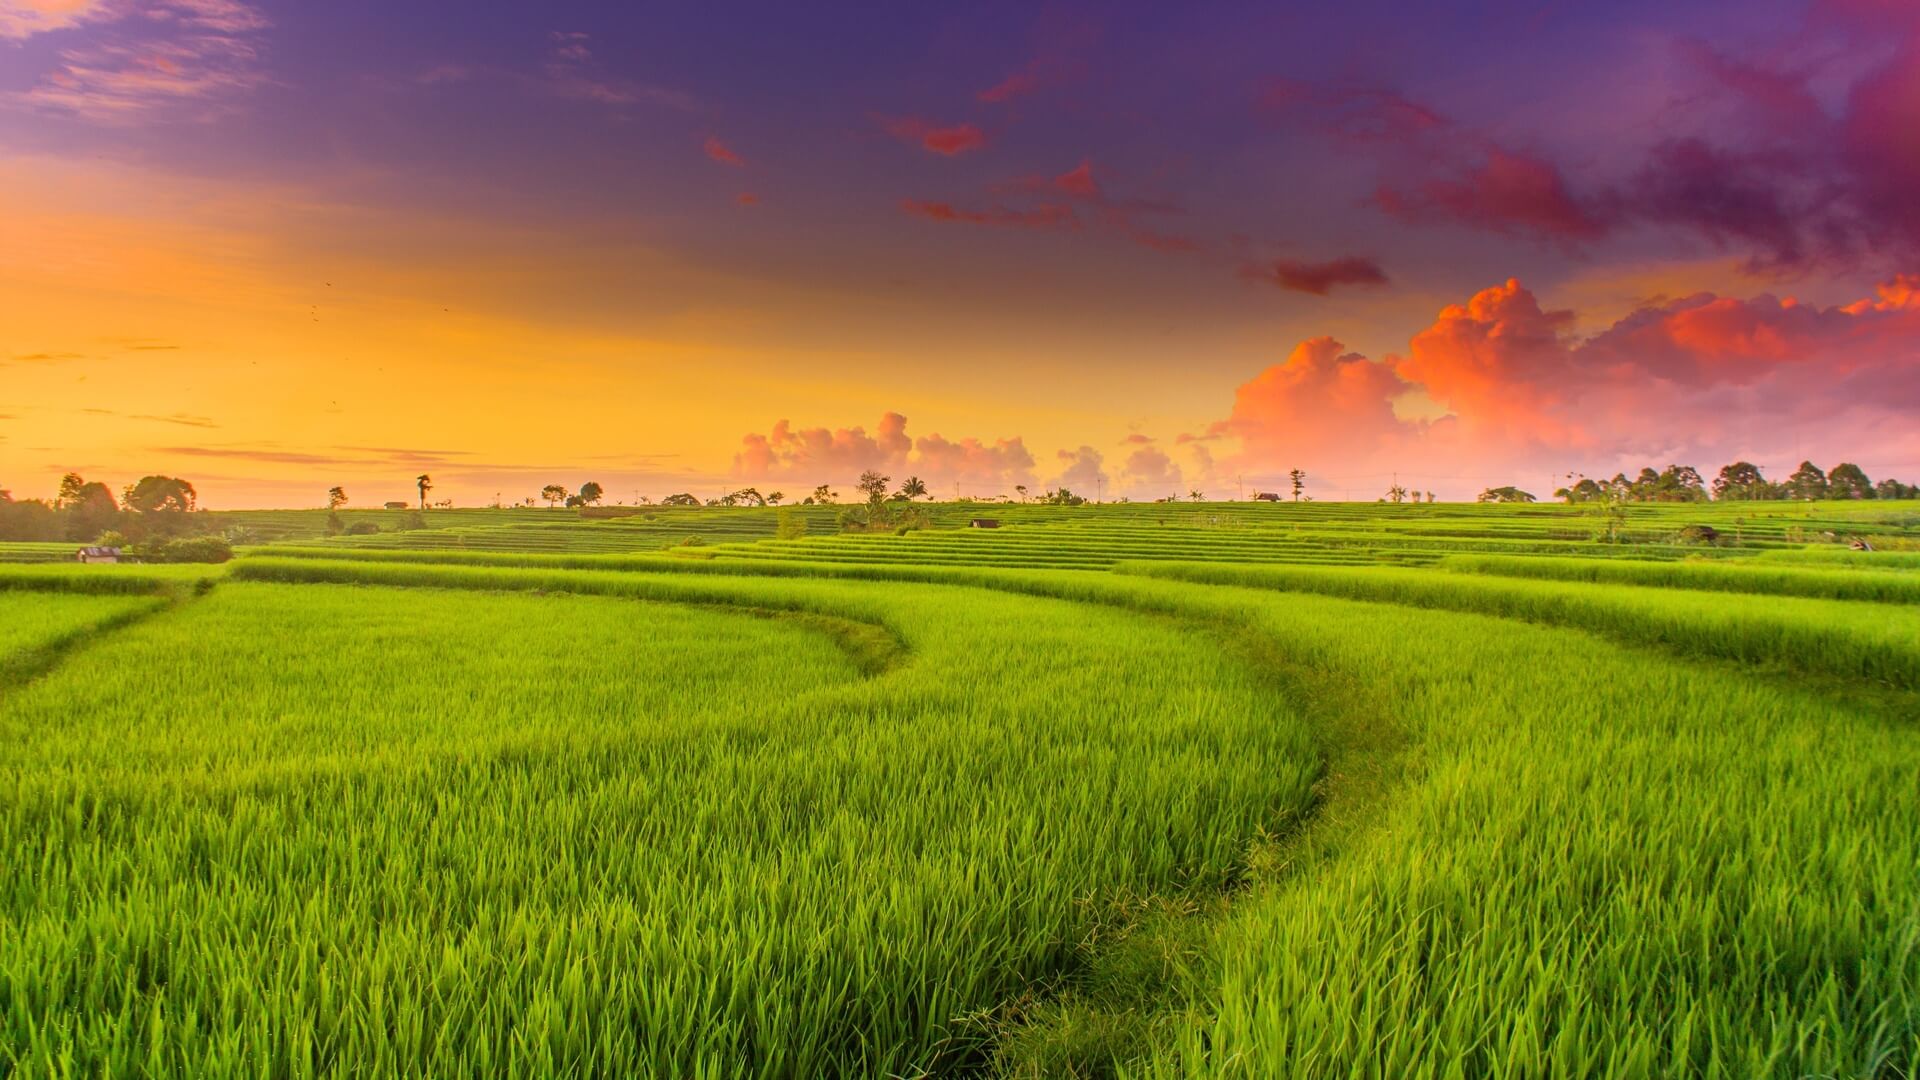 Regulations on rice land acquisition in Vietnam